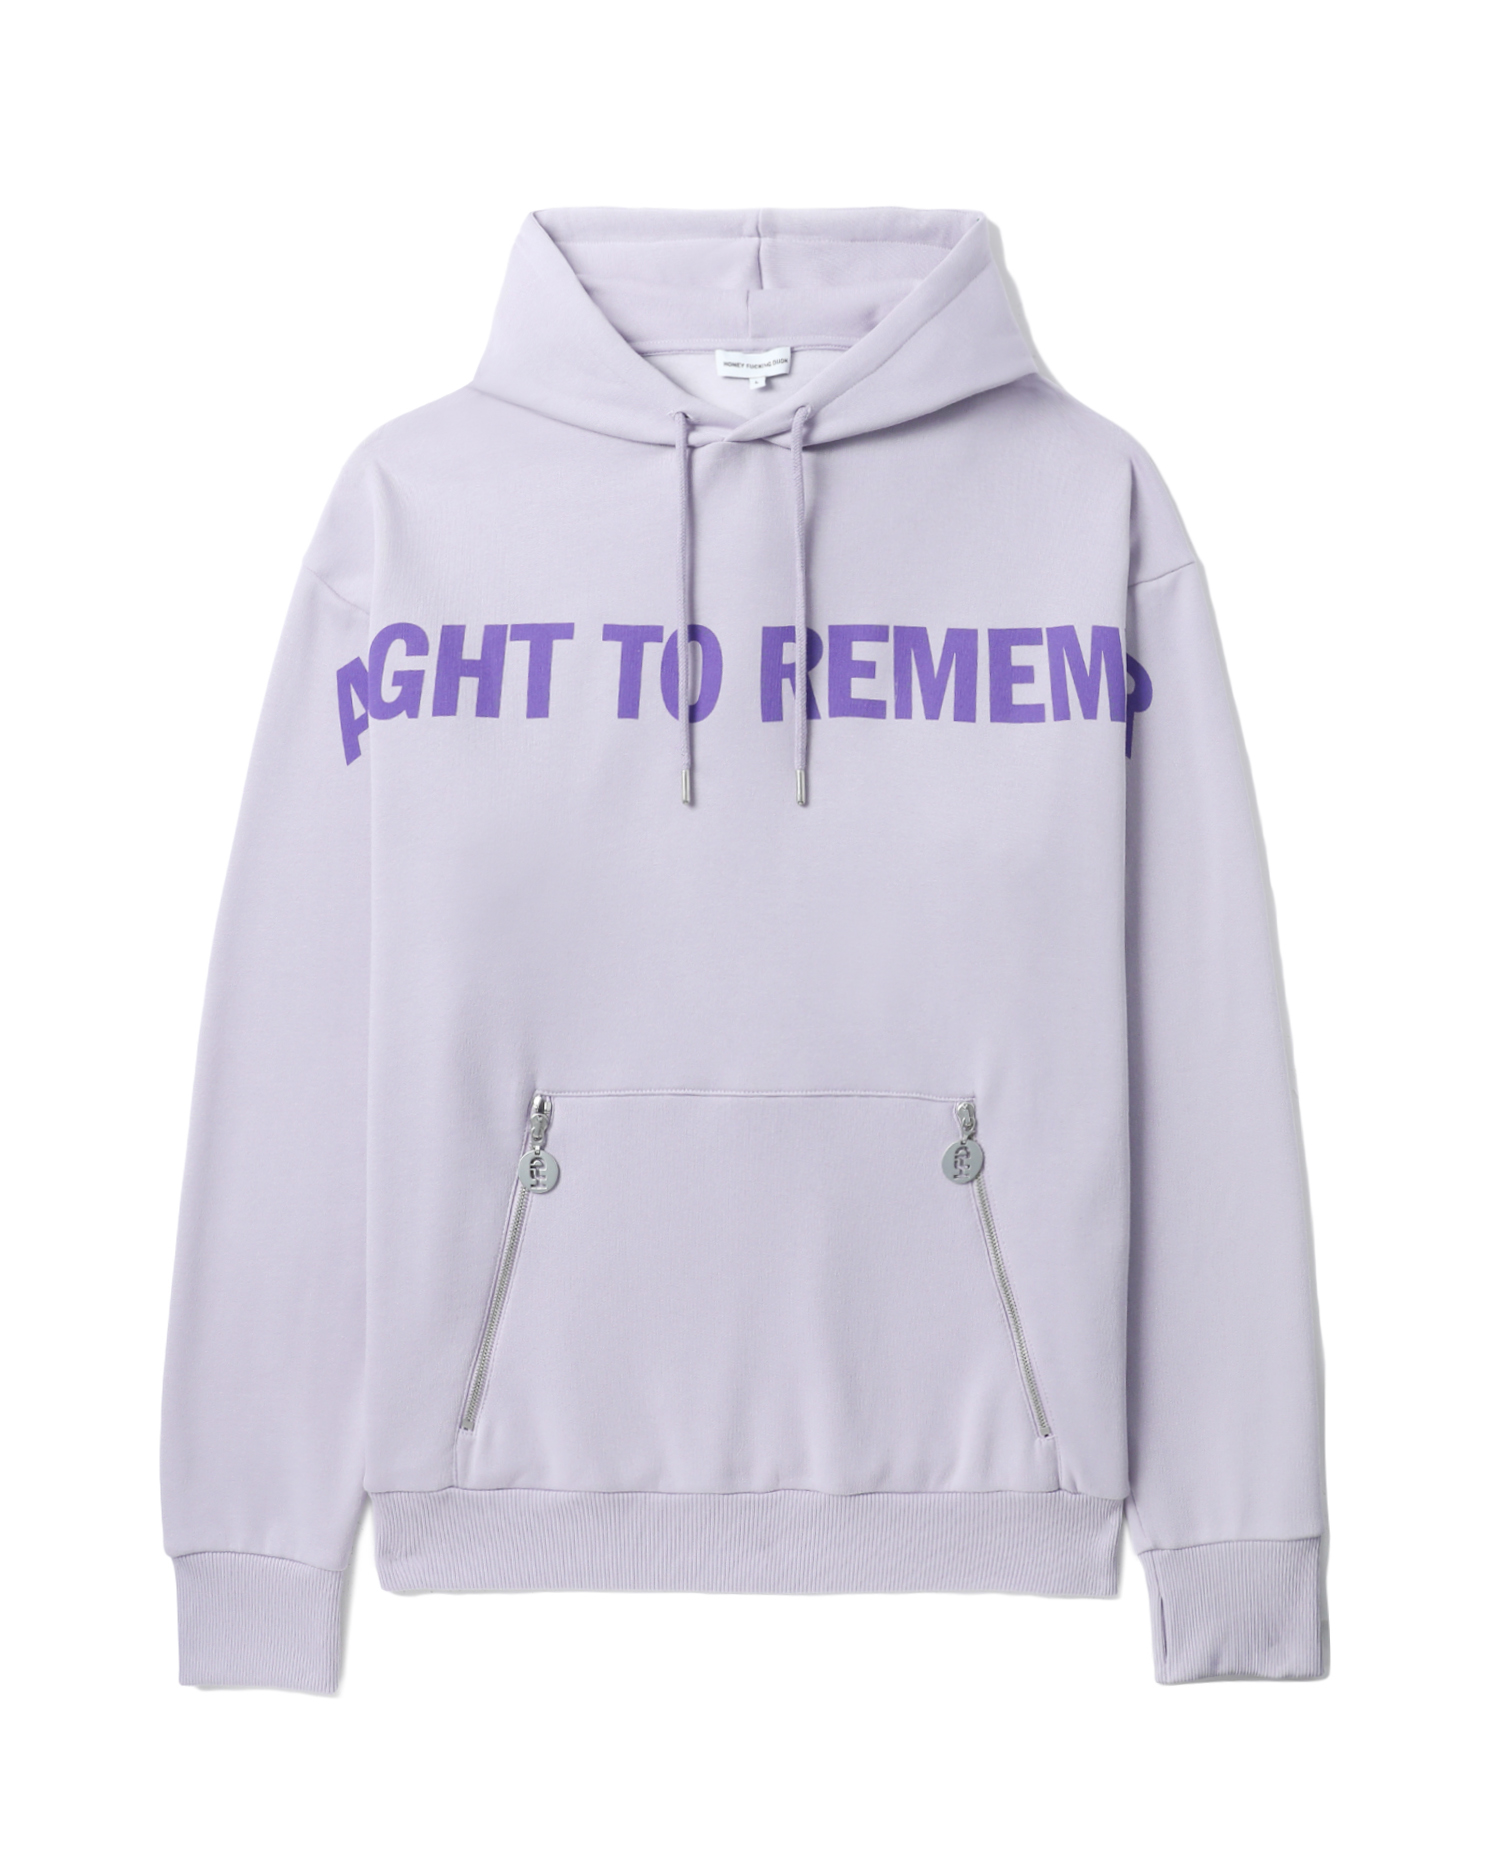 night to remember hoodie